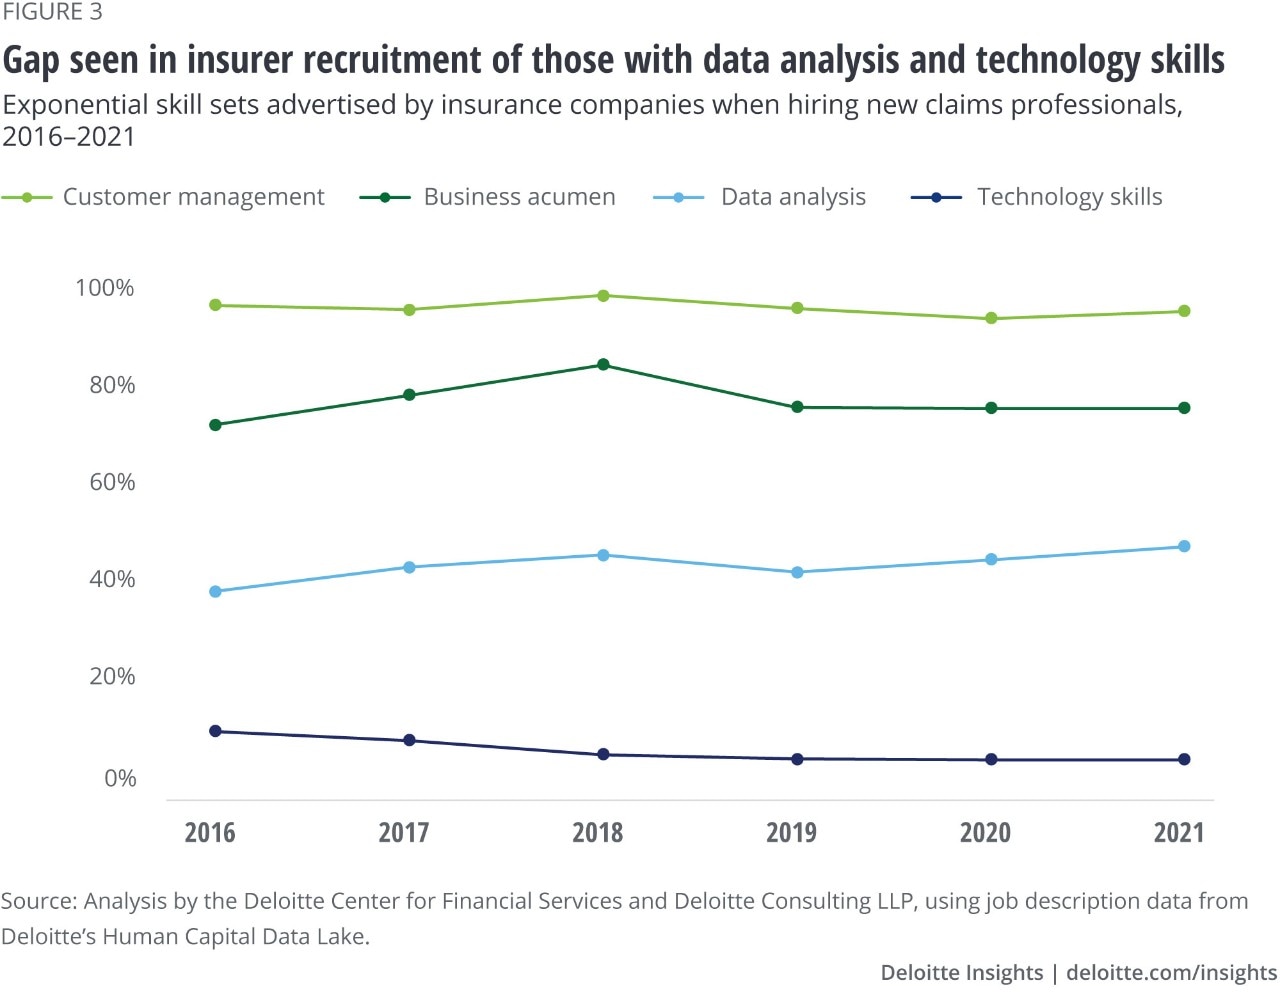 Figure 3. Gap seen in insurer recruitment of those with claims data analysis and technology skills